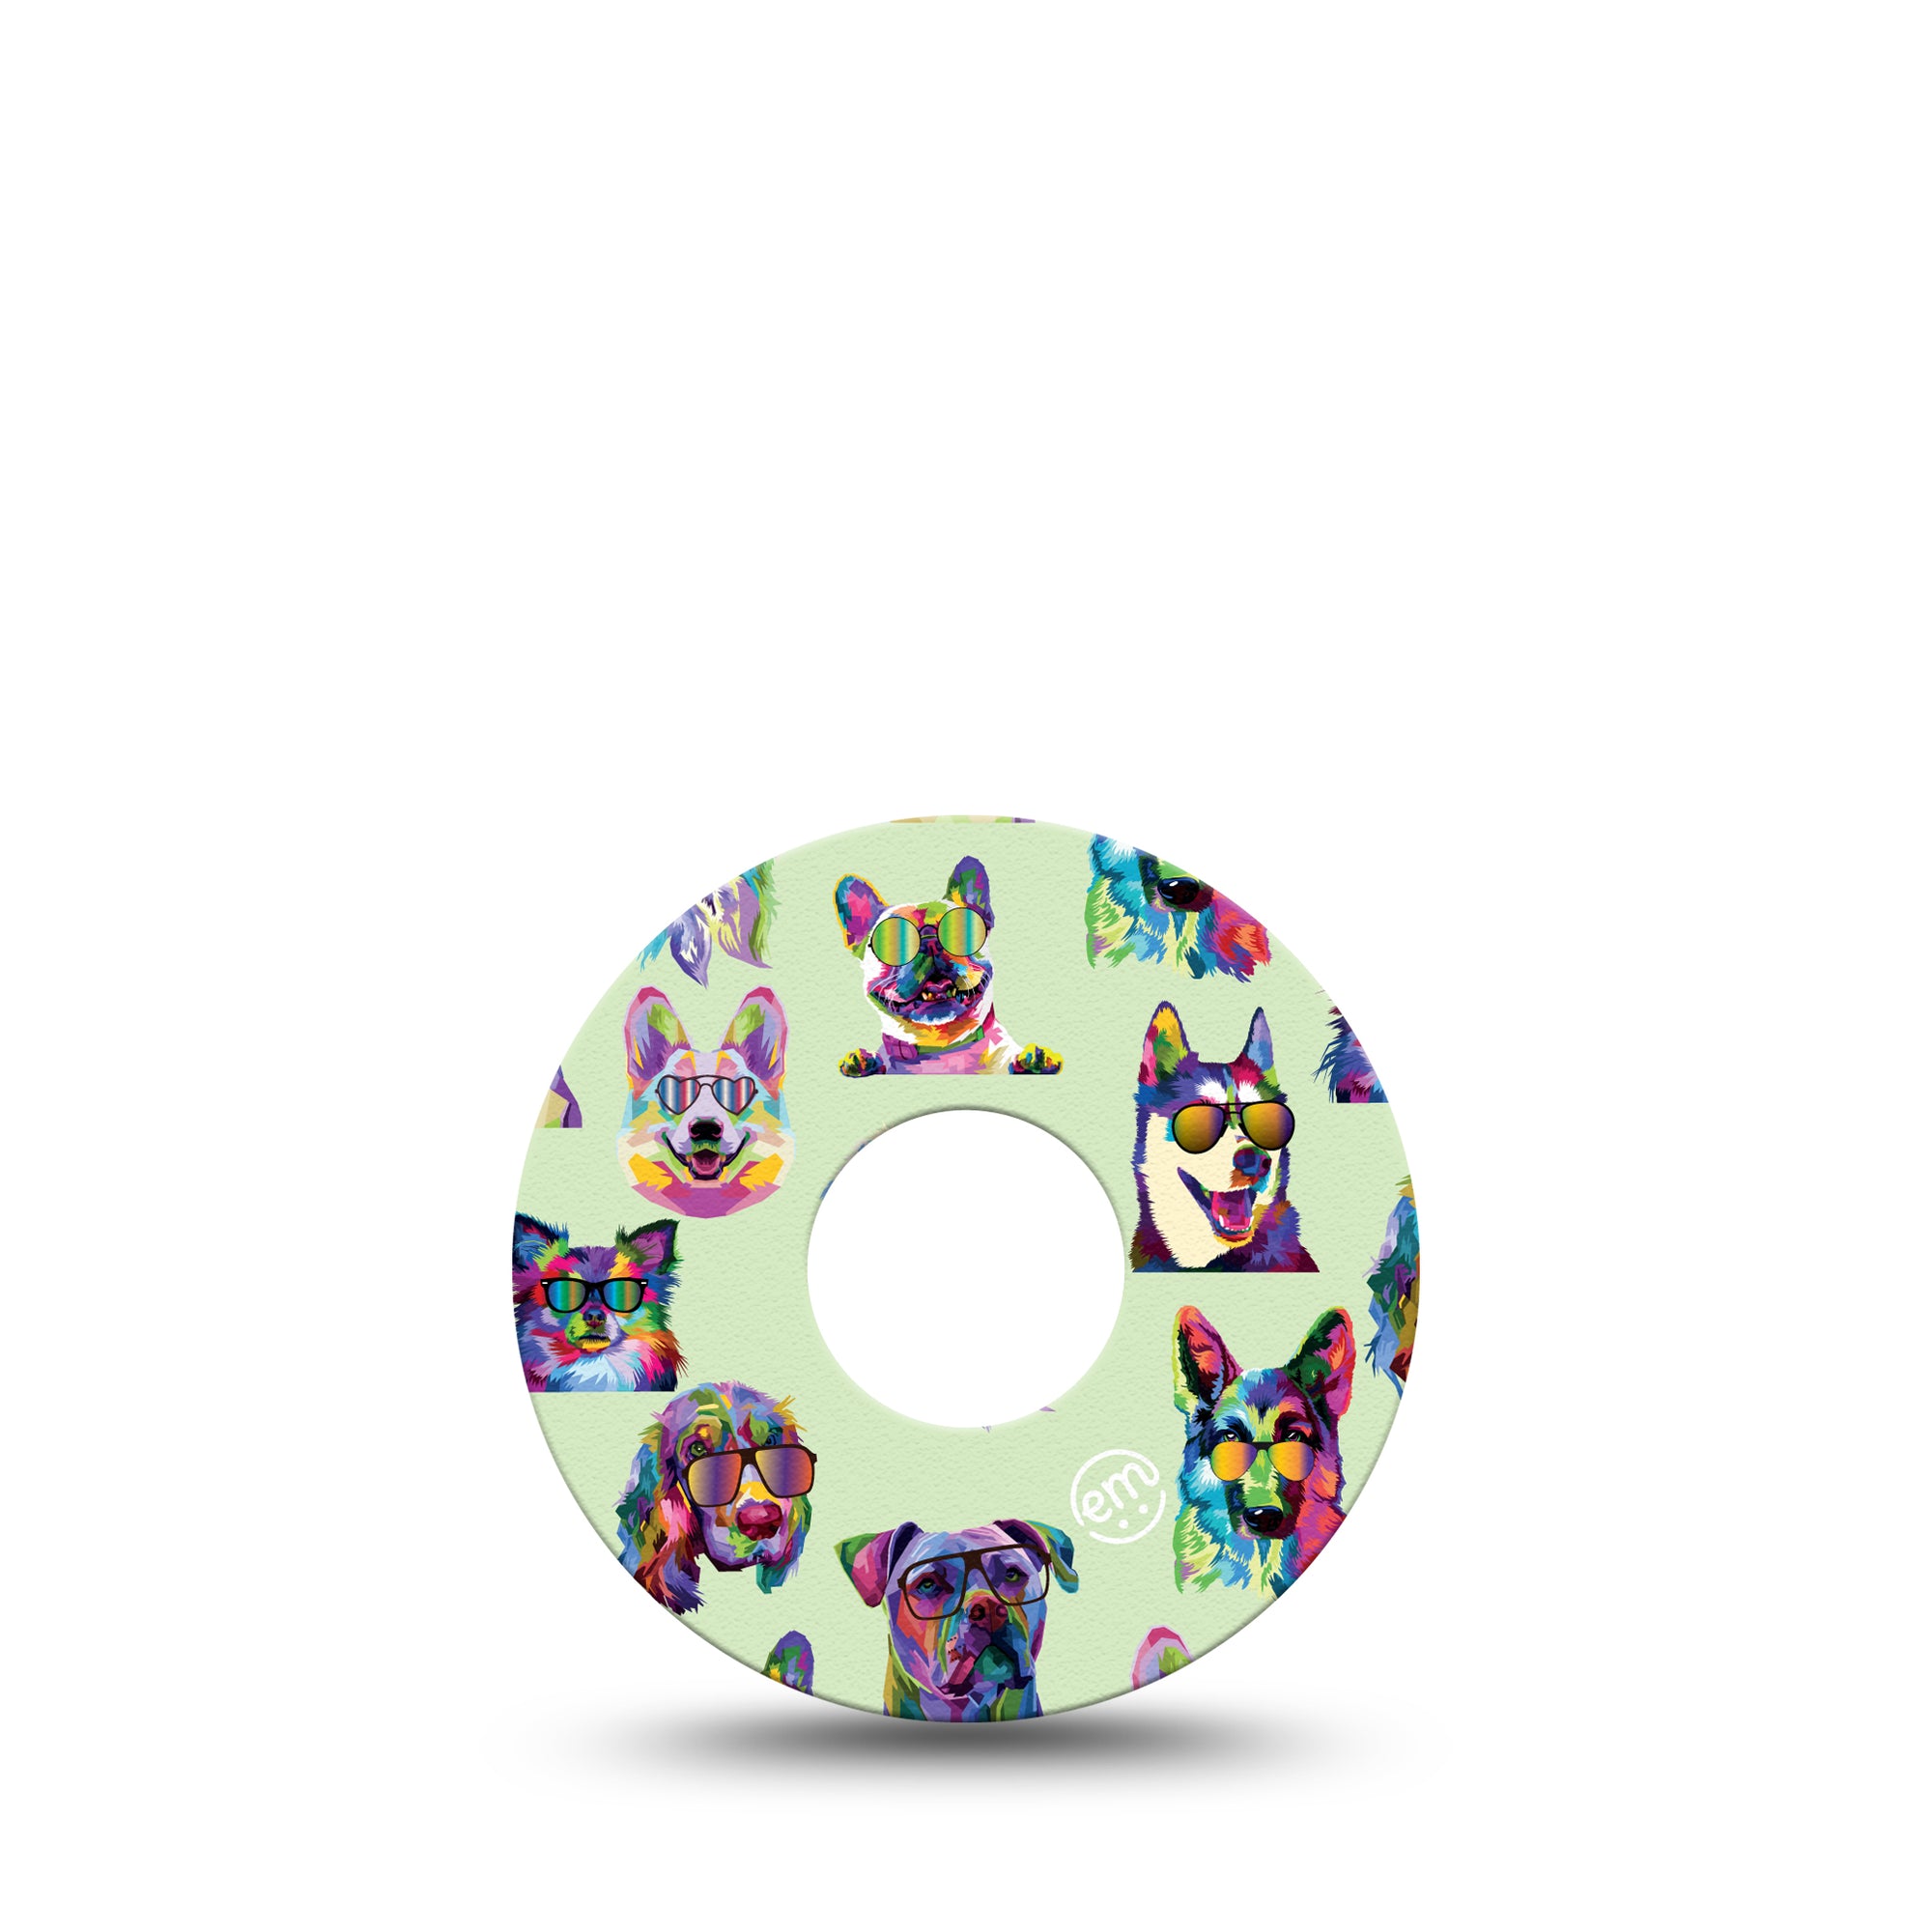 ExpressionMed Dog Party Libre 3 Tape, Single, Vibrant Colored Dogs Inspired, CGM Fixing Ring Patch Design